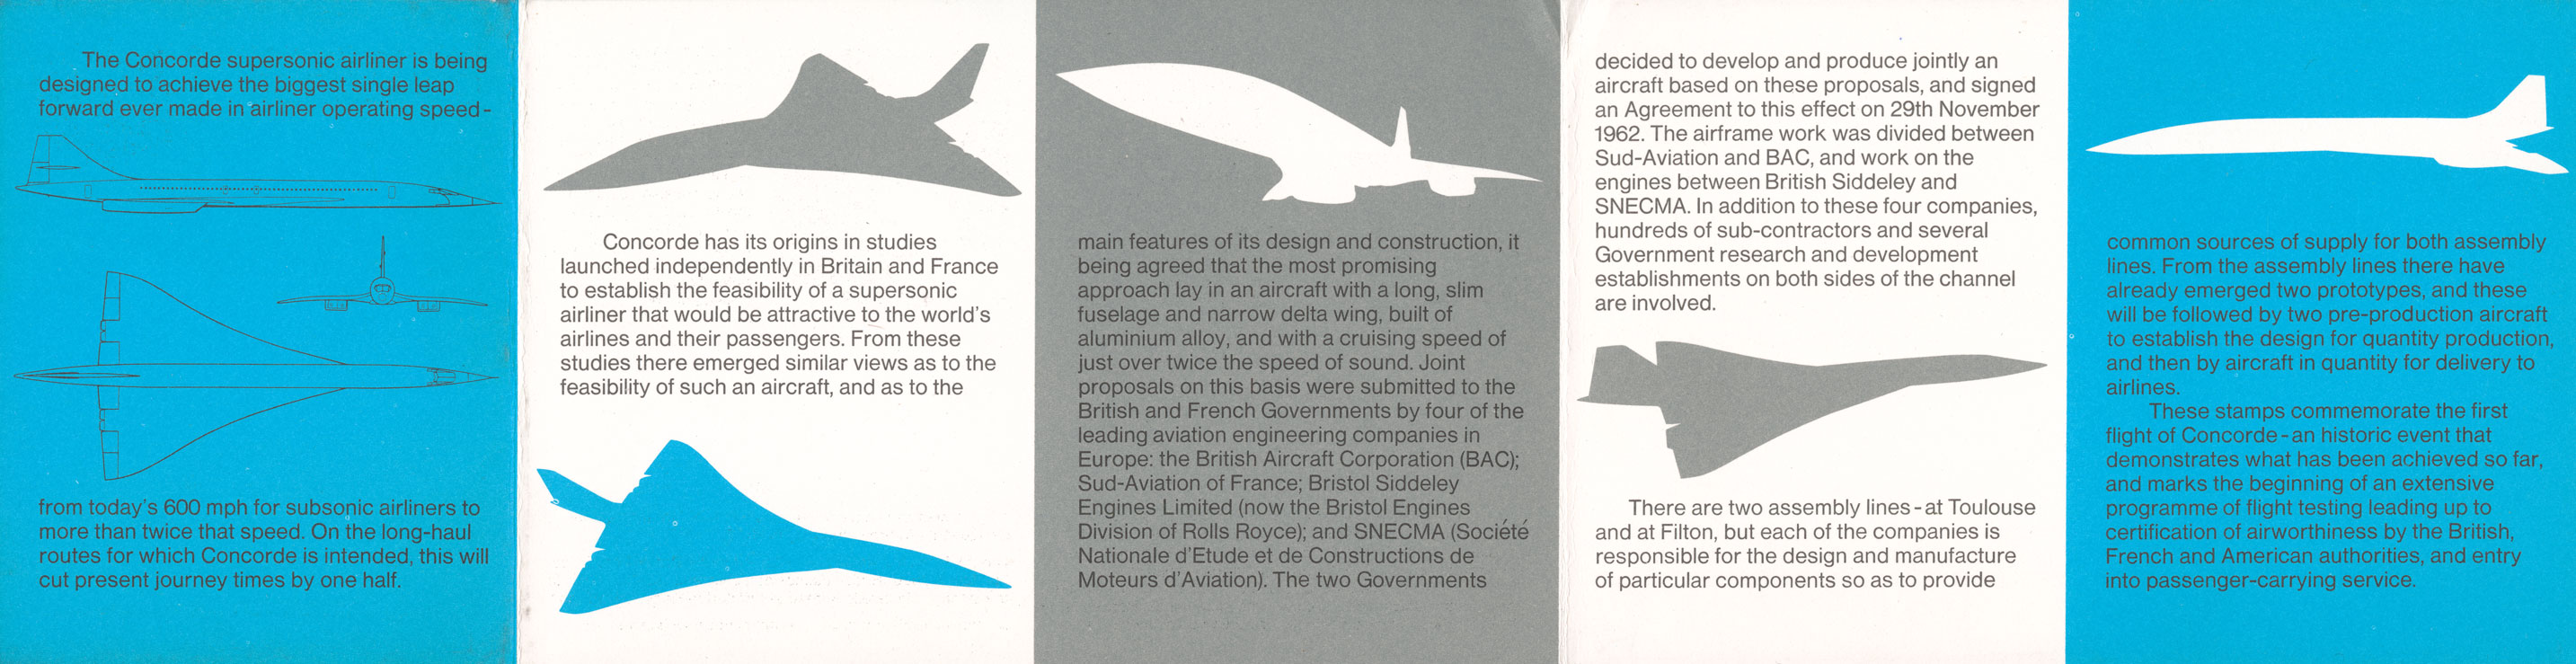 Information about Concorde printed on the inside of the Presentation Pack.